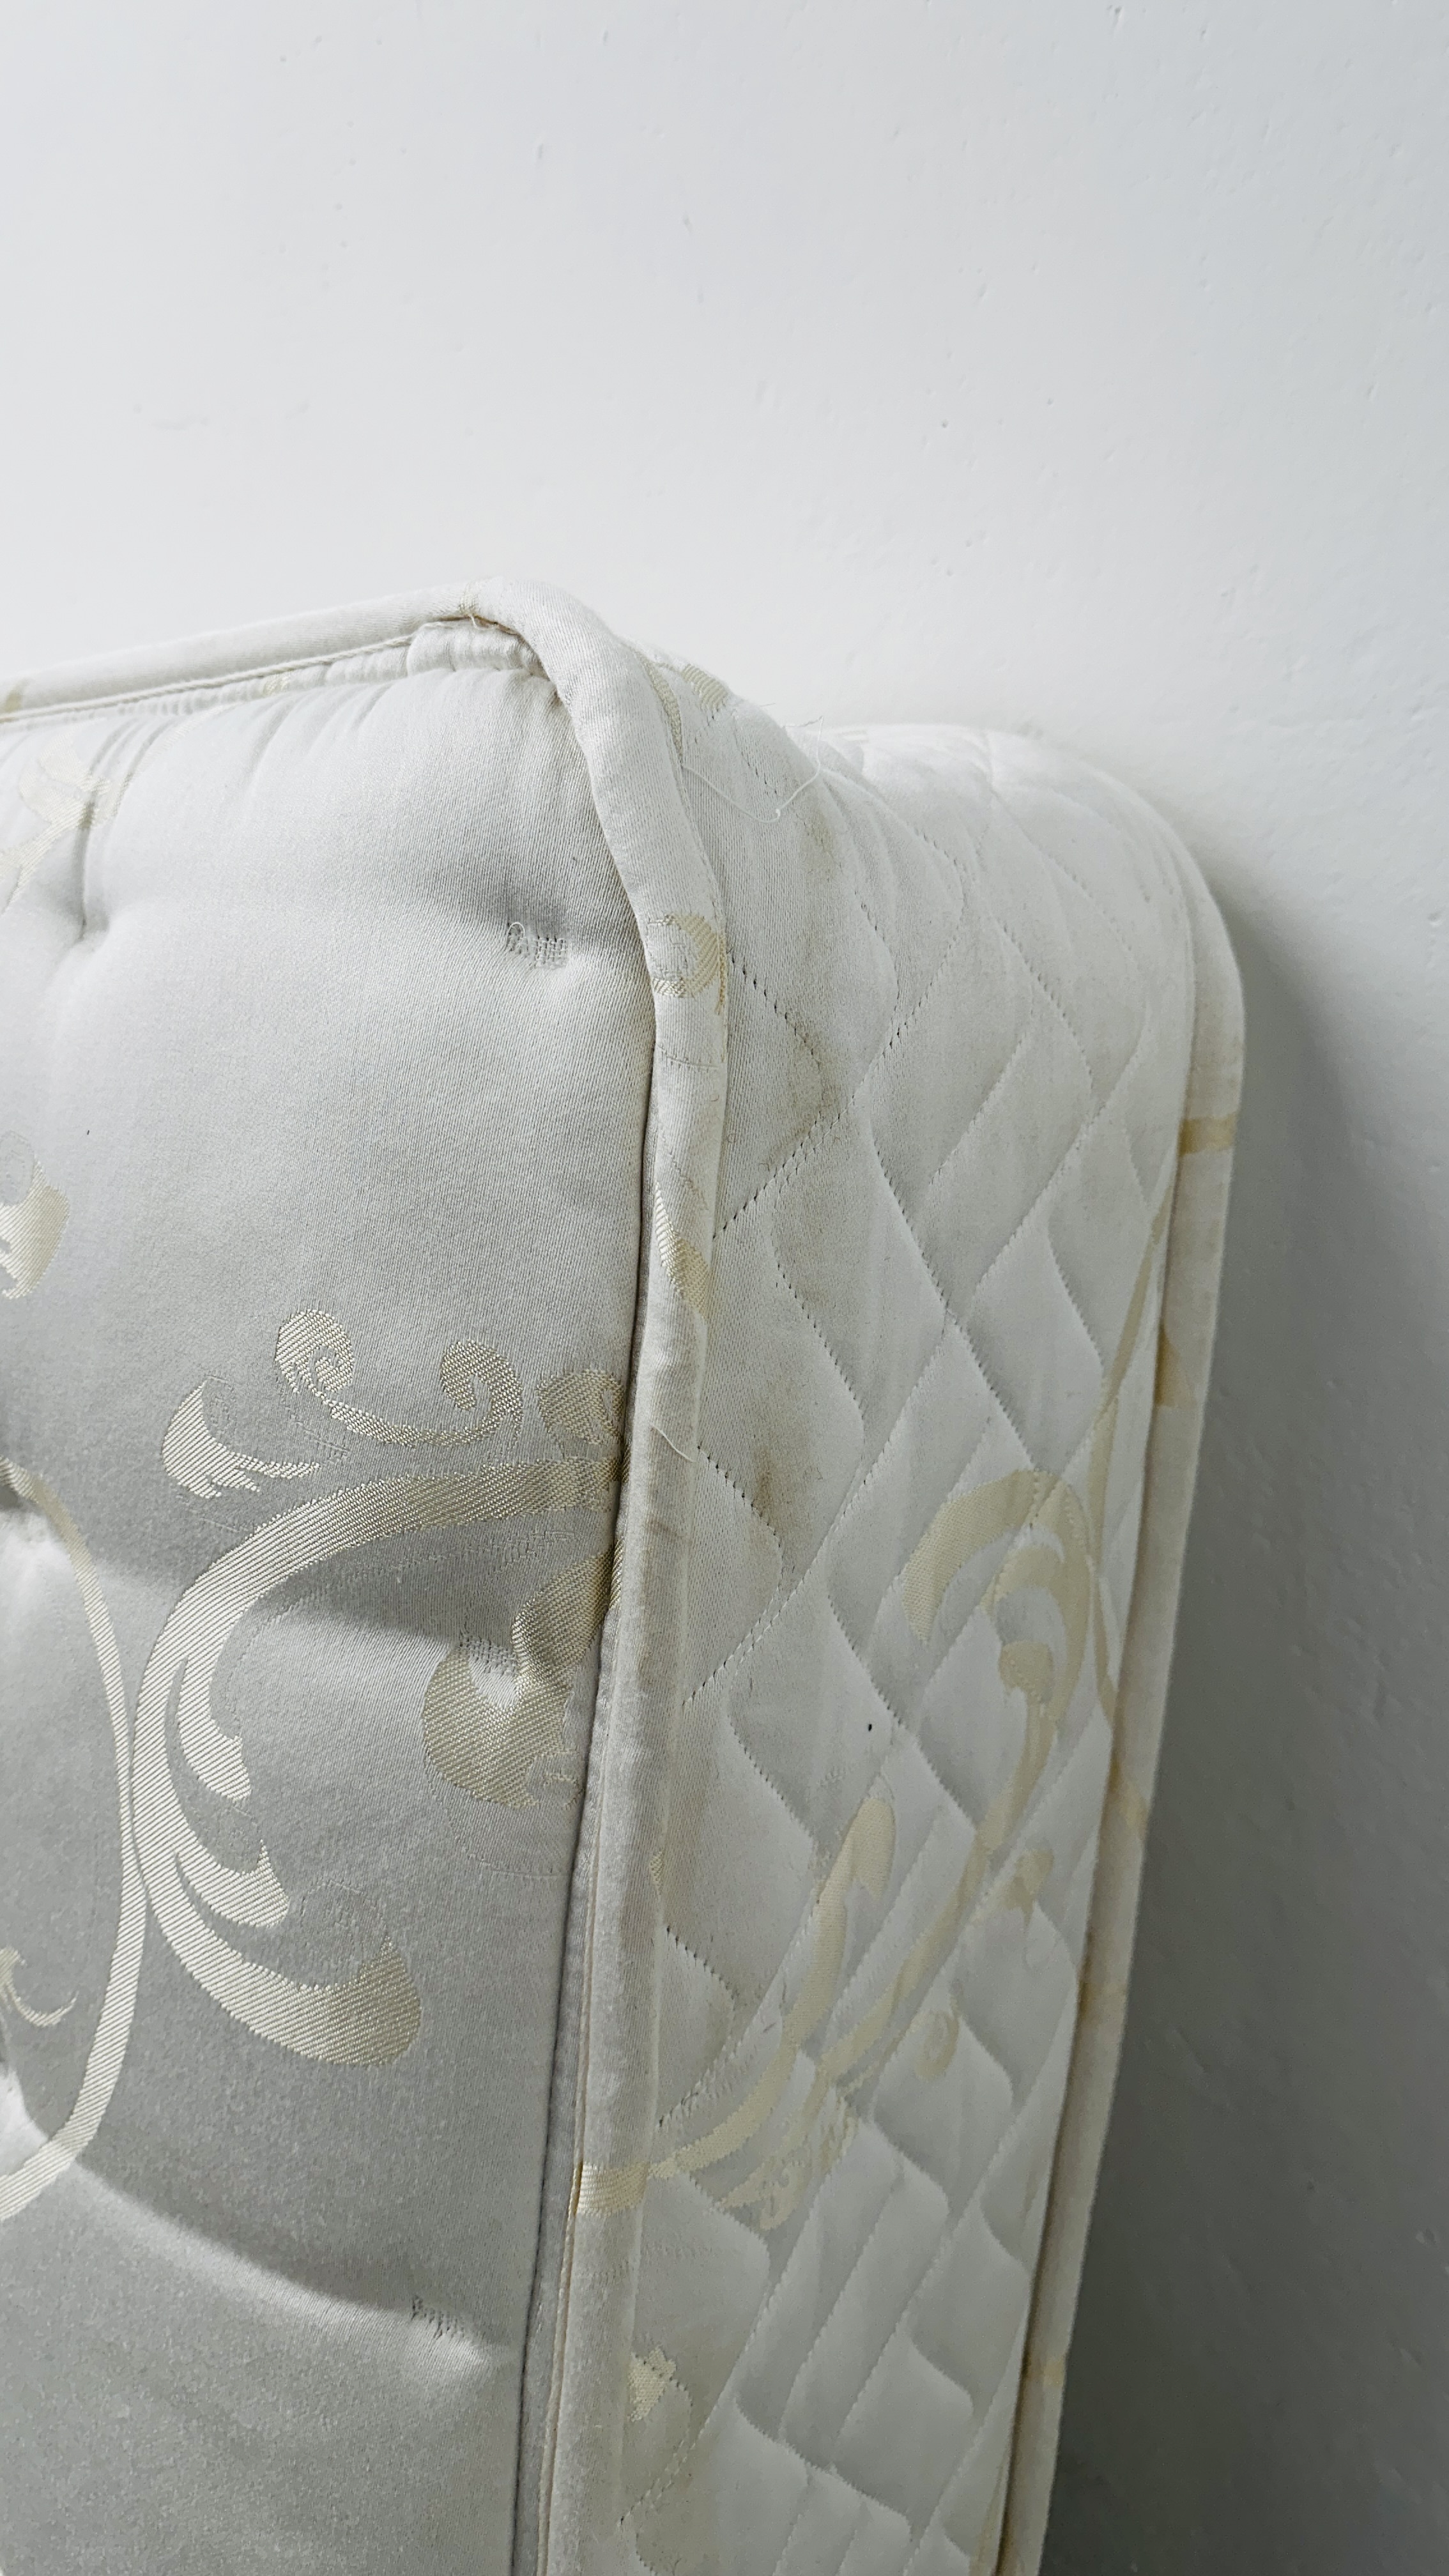 MYERS "AUGUSTA" DEEP QUILTED DOUBLE MATTRESS. - Image 8 of 10